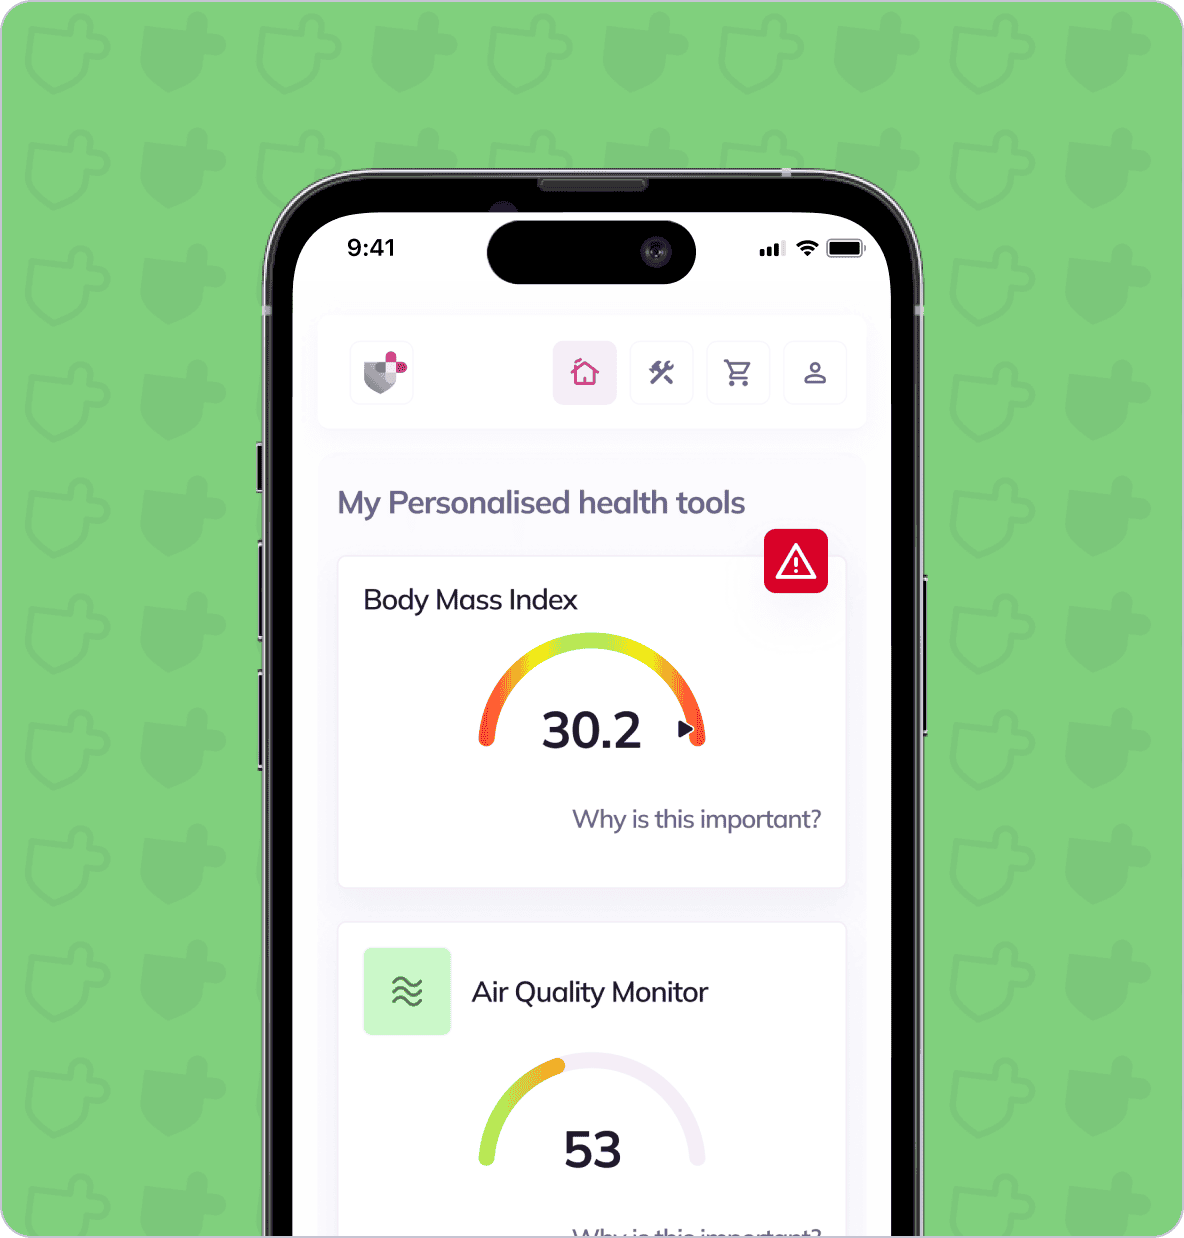 A smartphone displays a health app with a Body Mass Index of 30.2 and an Air Quality Monitor reading of 53, both on screen. The background is green with a repeat pattern of shield icons.